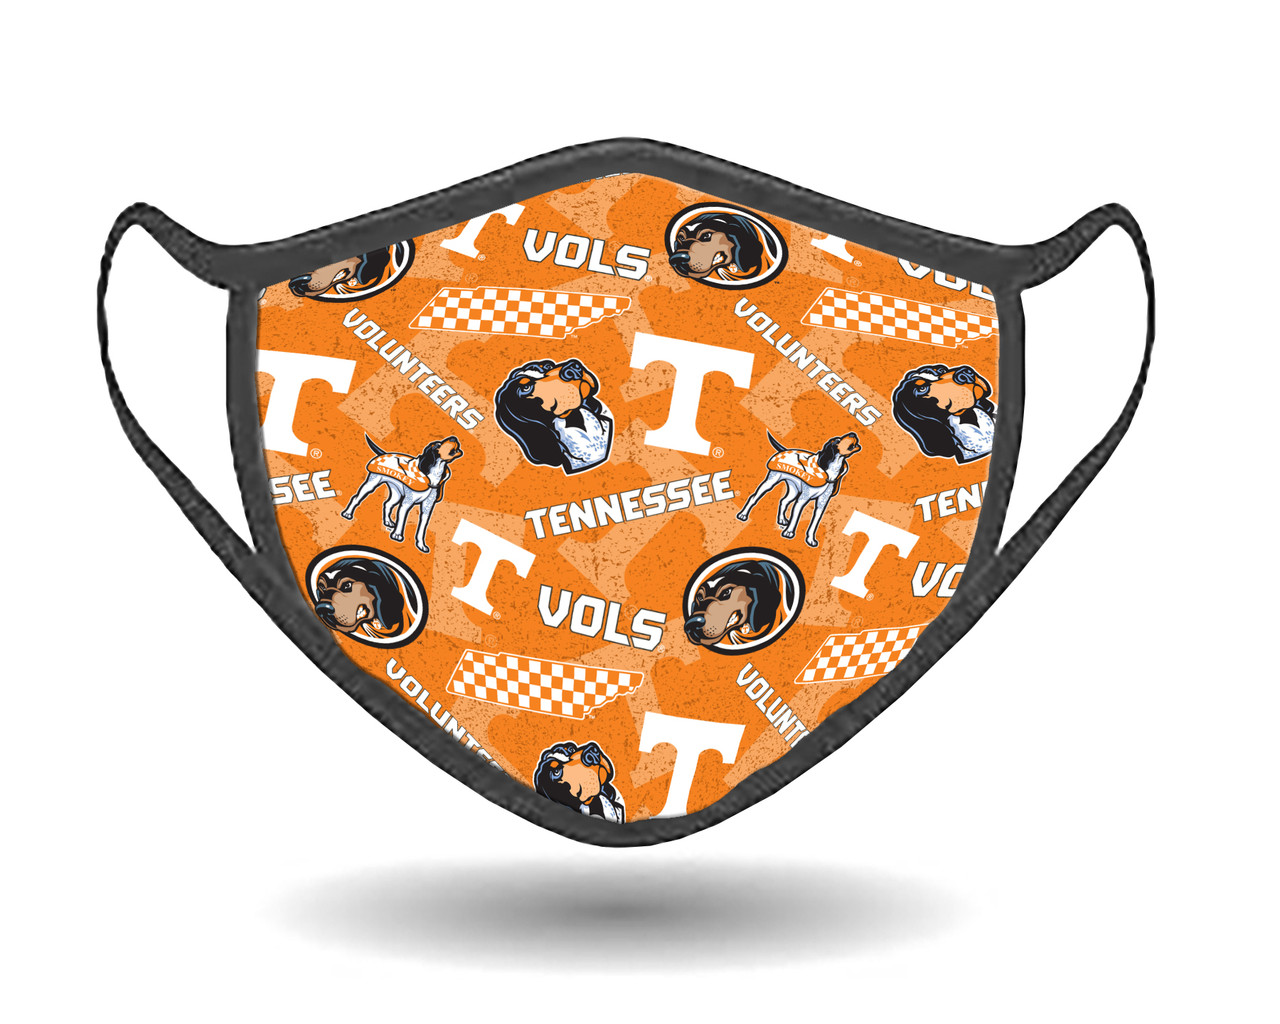 University of Tennessee Face Mask with Anti-microbial & Probiotics-100% Cotton-Individually Packaged-Adjustable Earloop